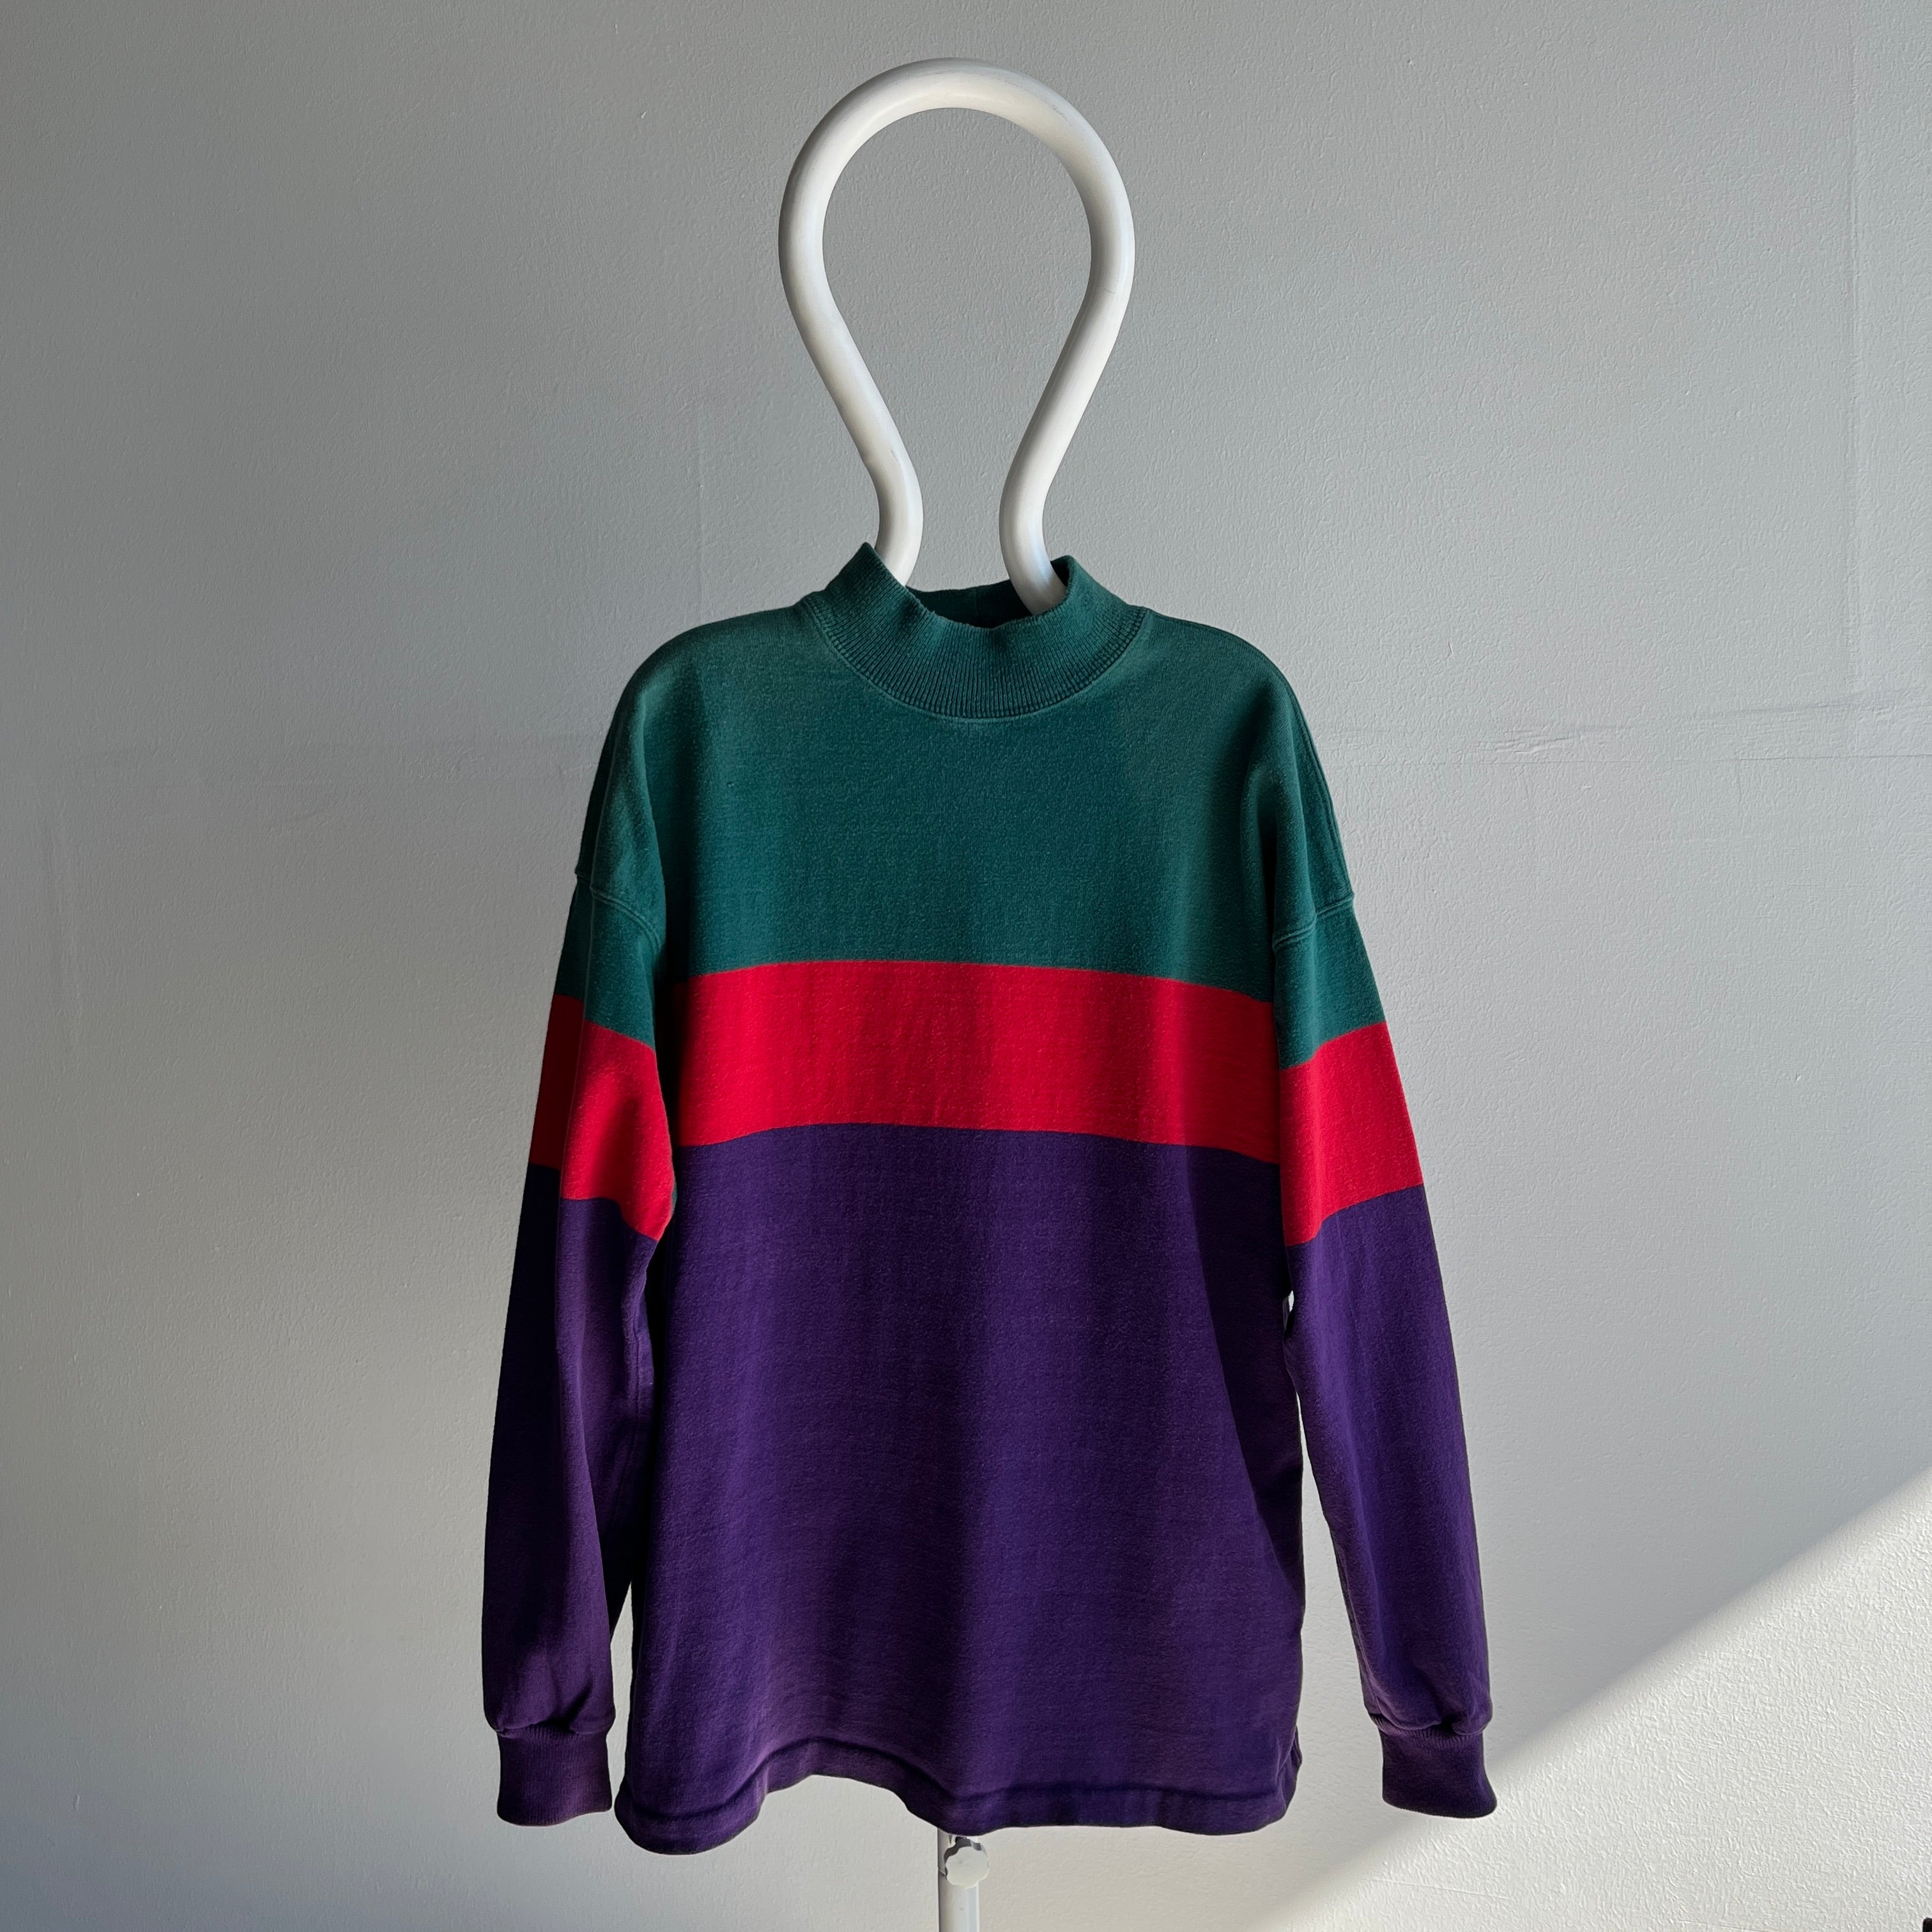 1980/90s USA Made L.L. Bean Cotton Rugby Weighted Color Block Mock Neck